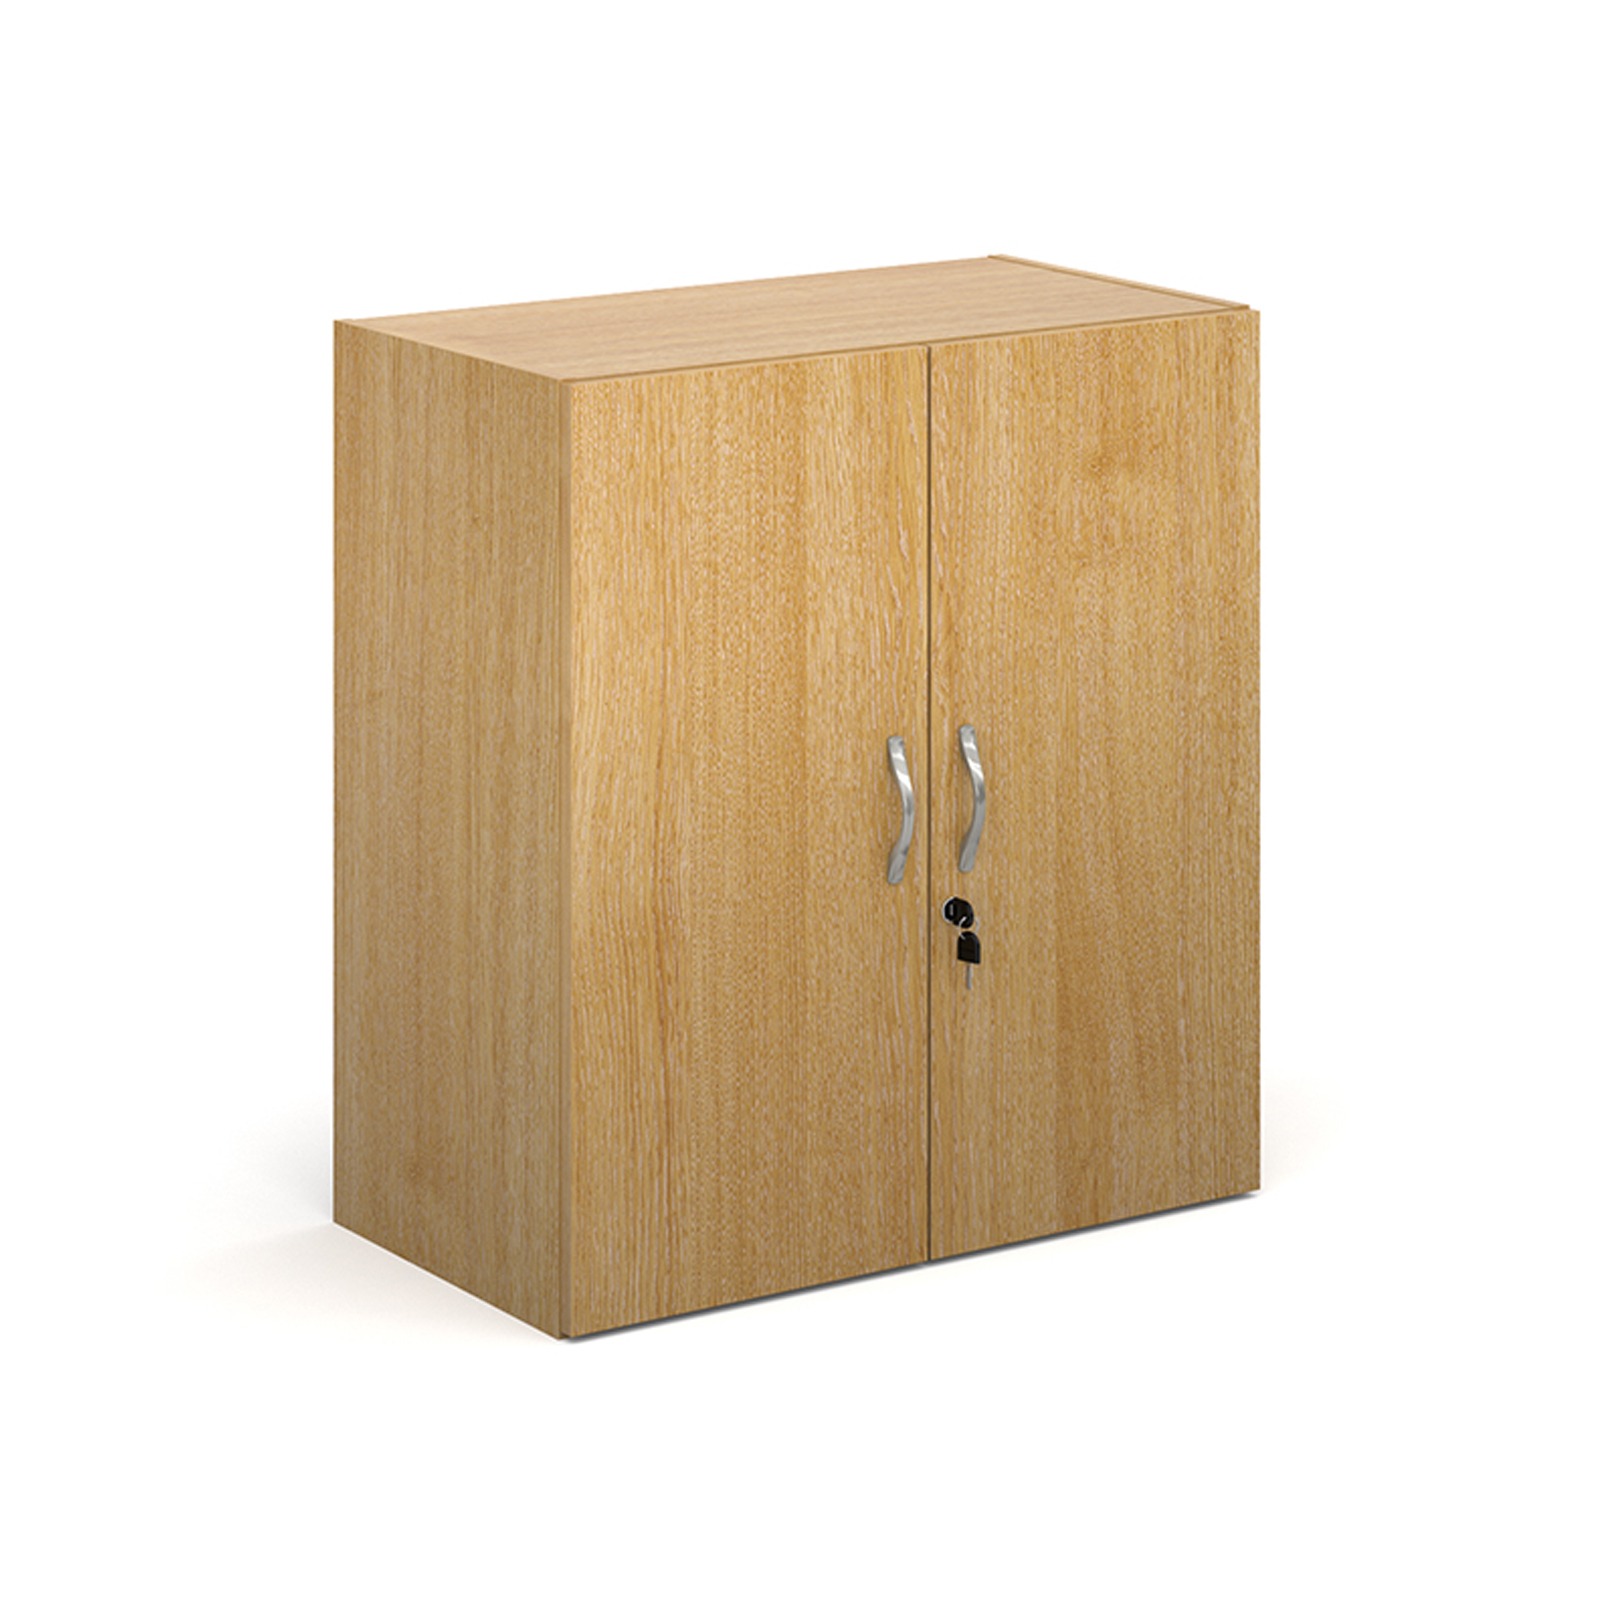 Up to 1200mm High Contract double door cupboard 830mm high with 1 shelf - oak